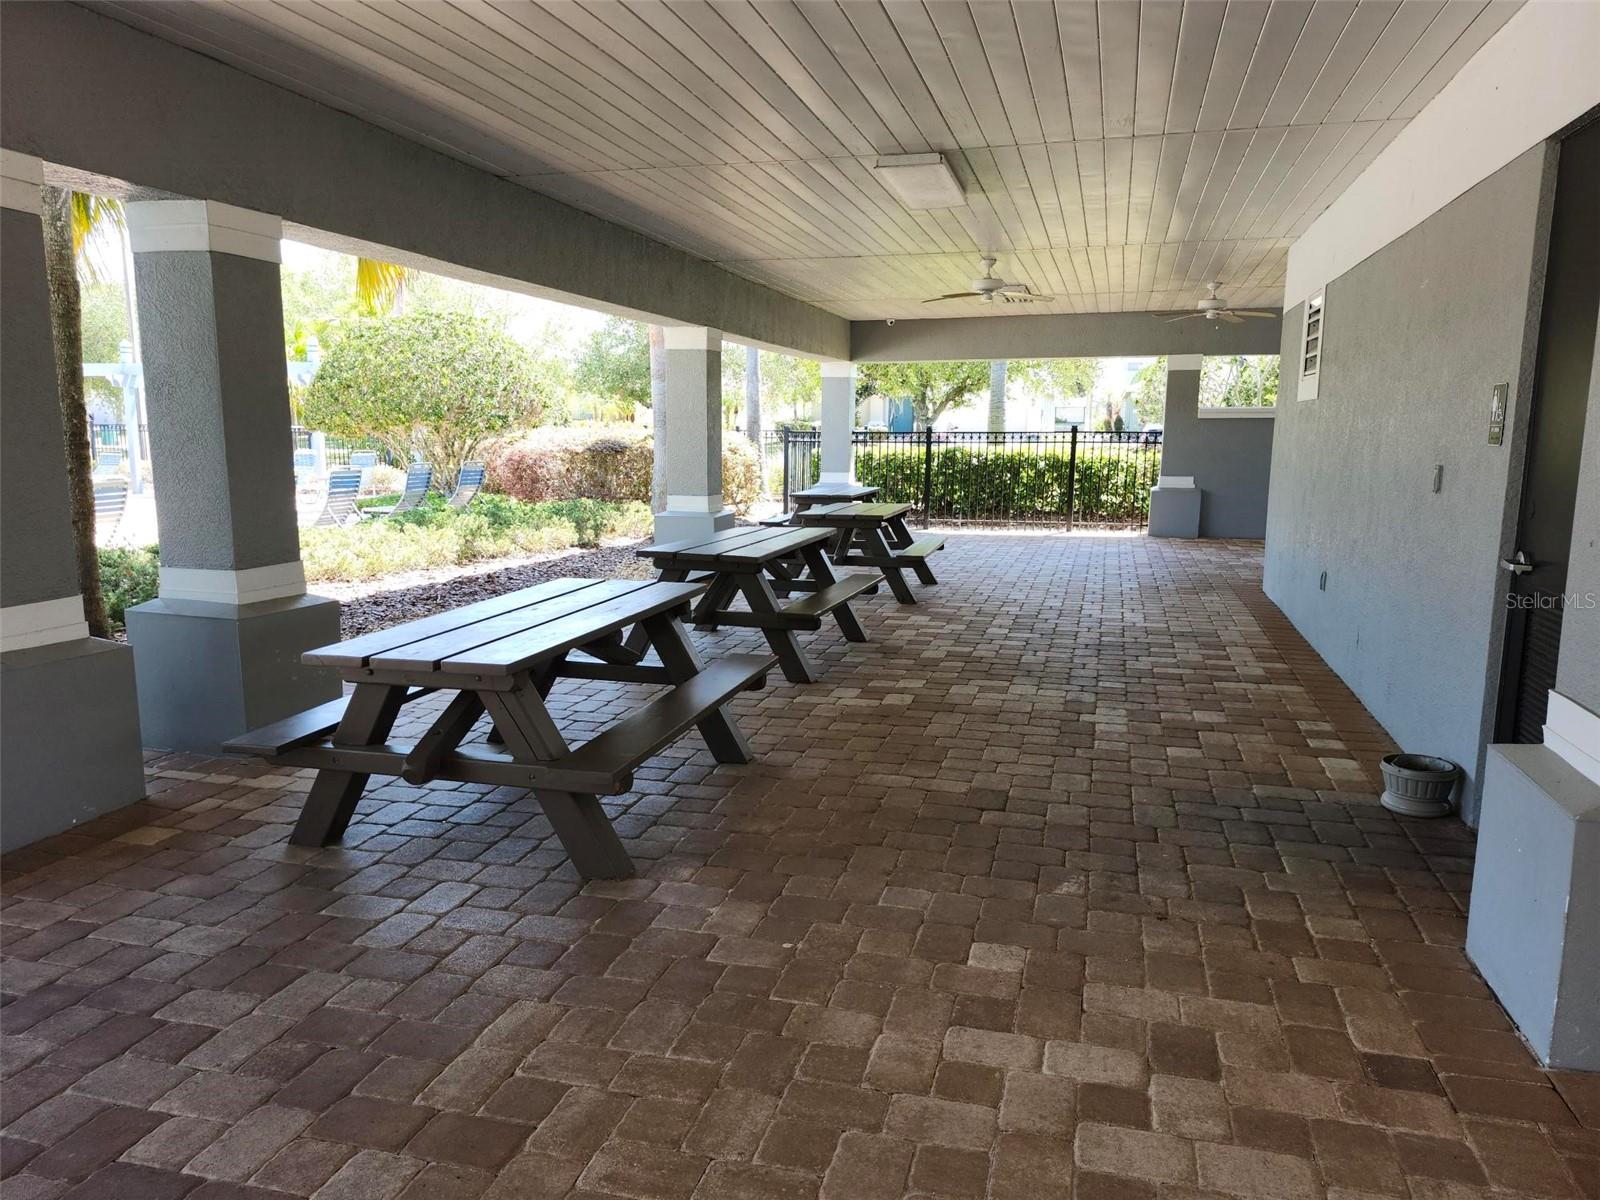 Club house has numerous picnic tables to use for your gatherings